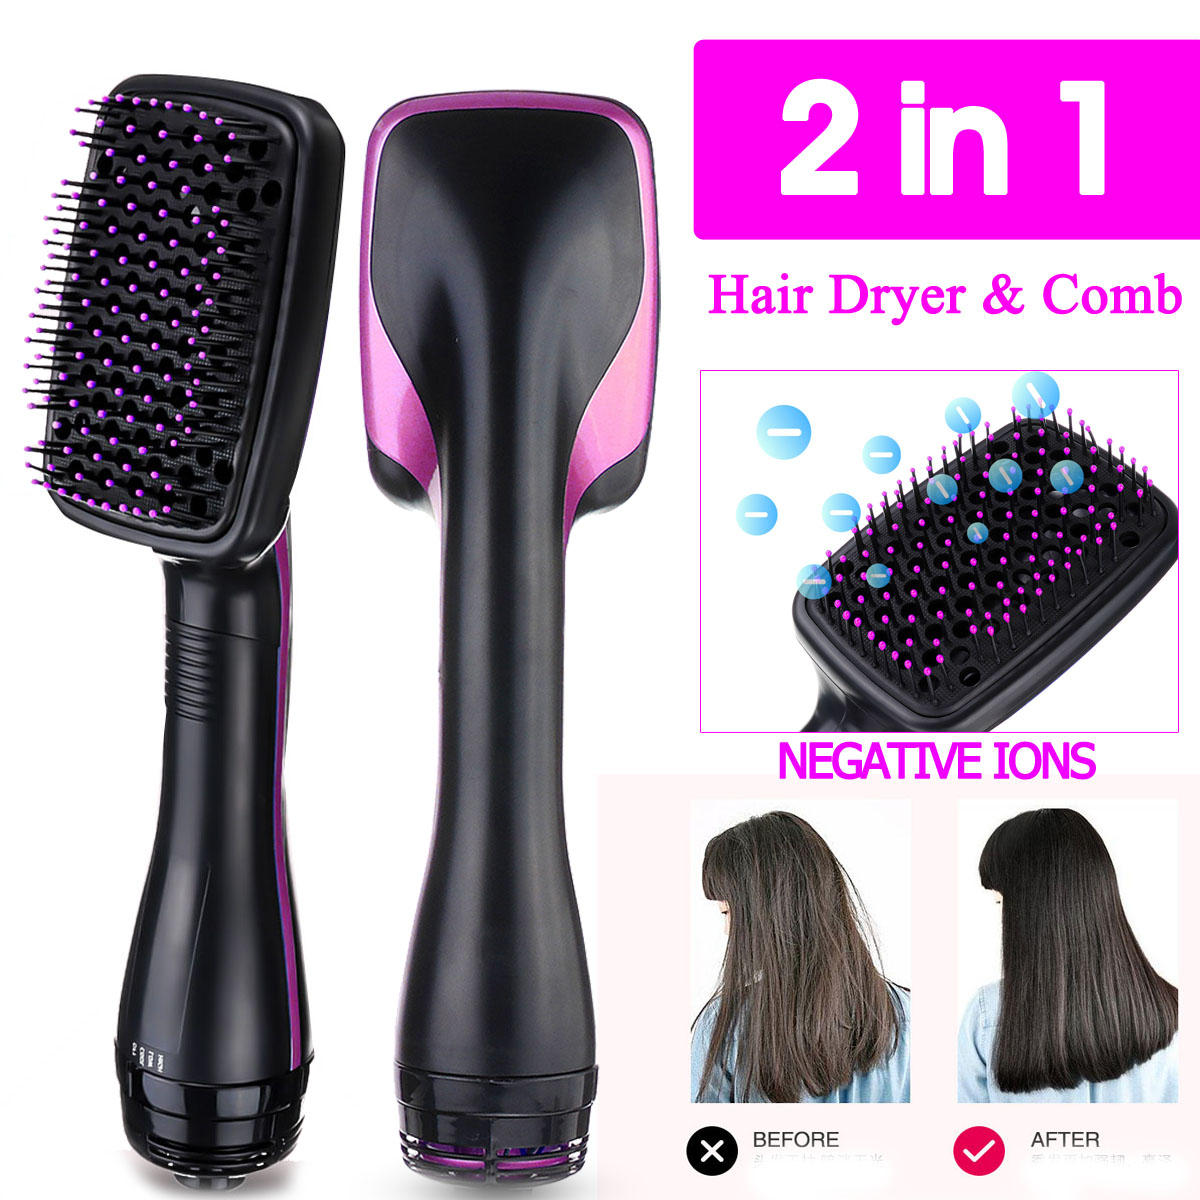 hair dryer with comb attachment amazon